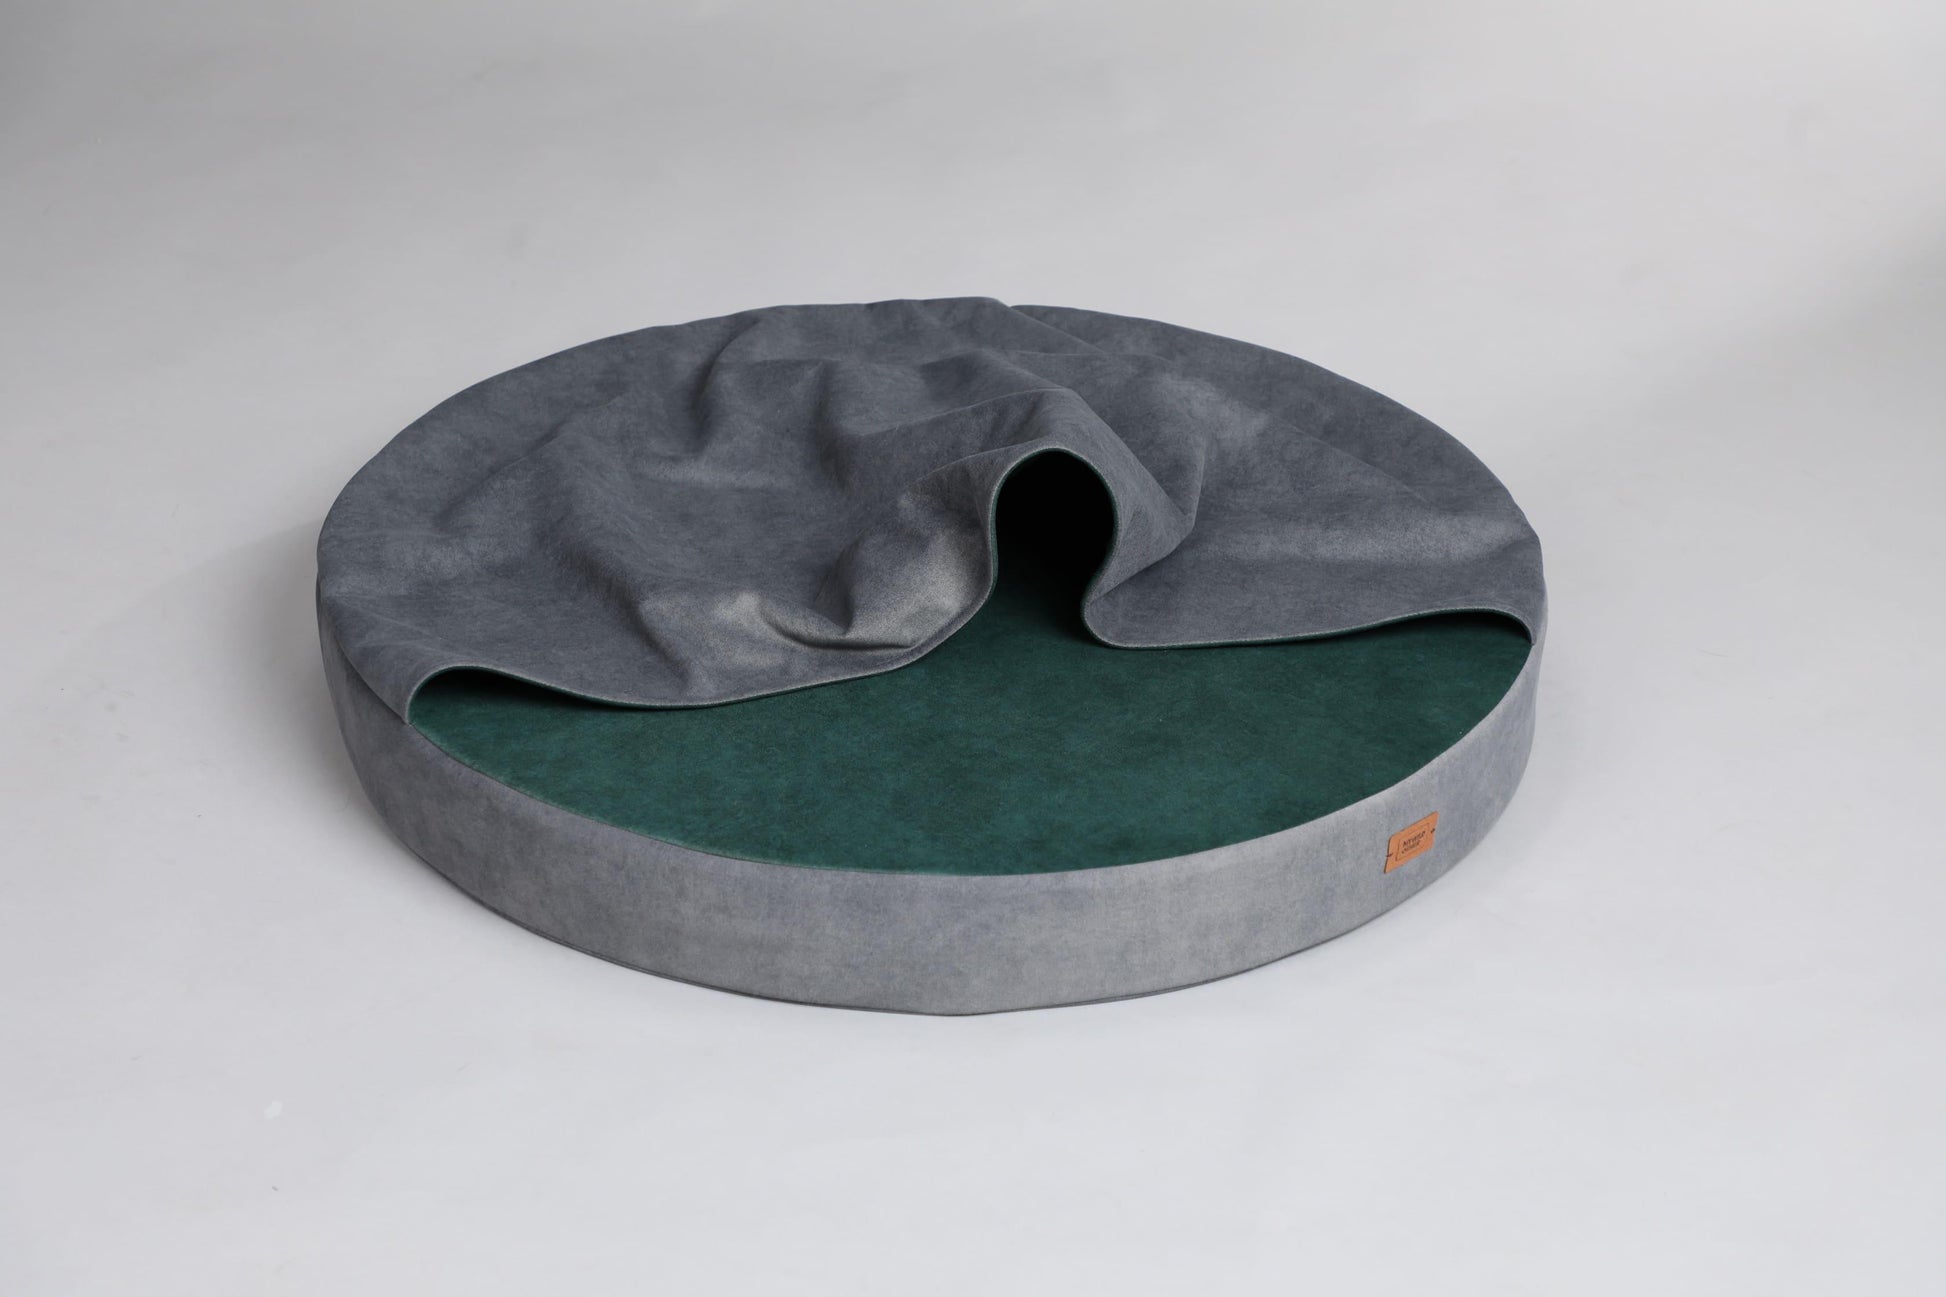 Cozy cave dog bed. STEEL GREY+MOSS GREEN - European handmade dog accessories by My Wild Other